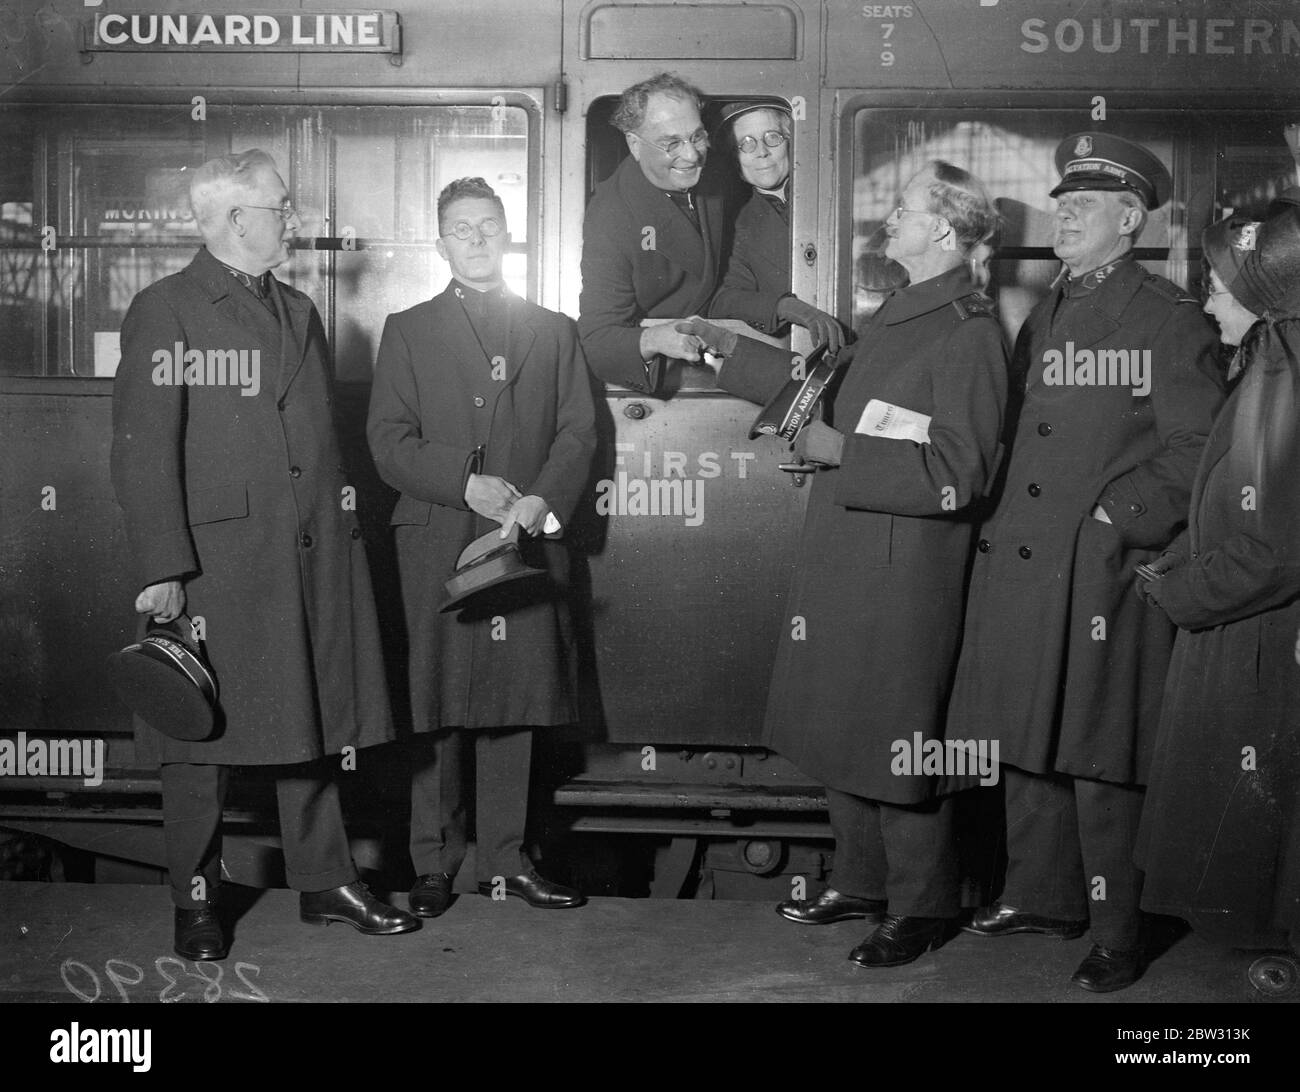 The salvation army commissioner Black and White Stock Photos & Images ...